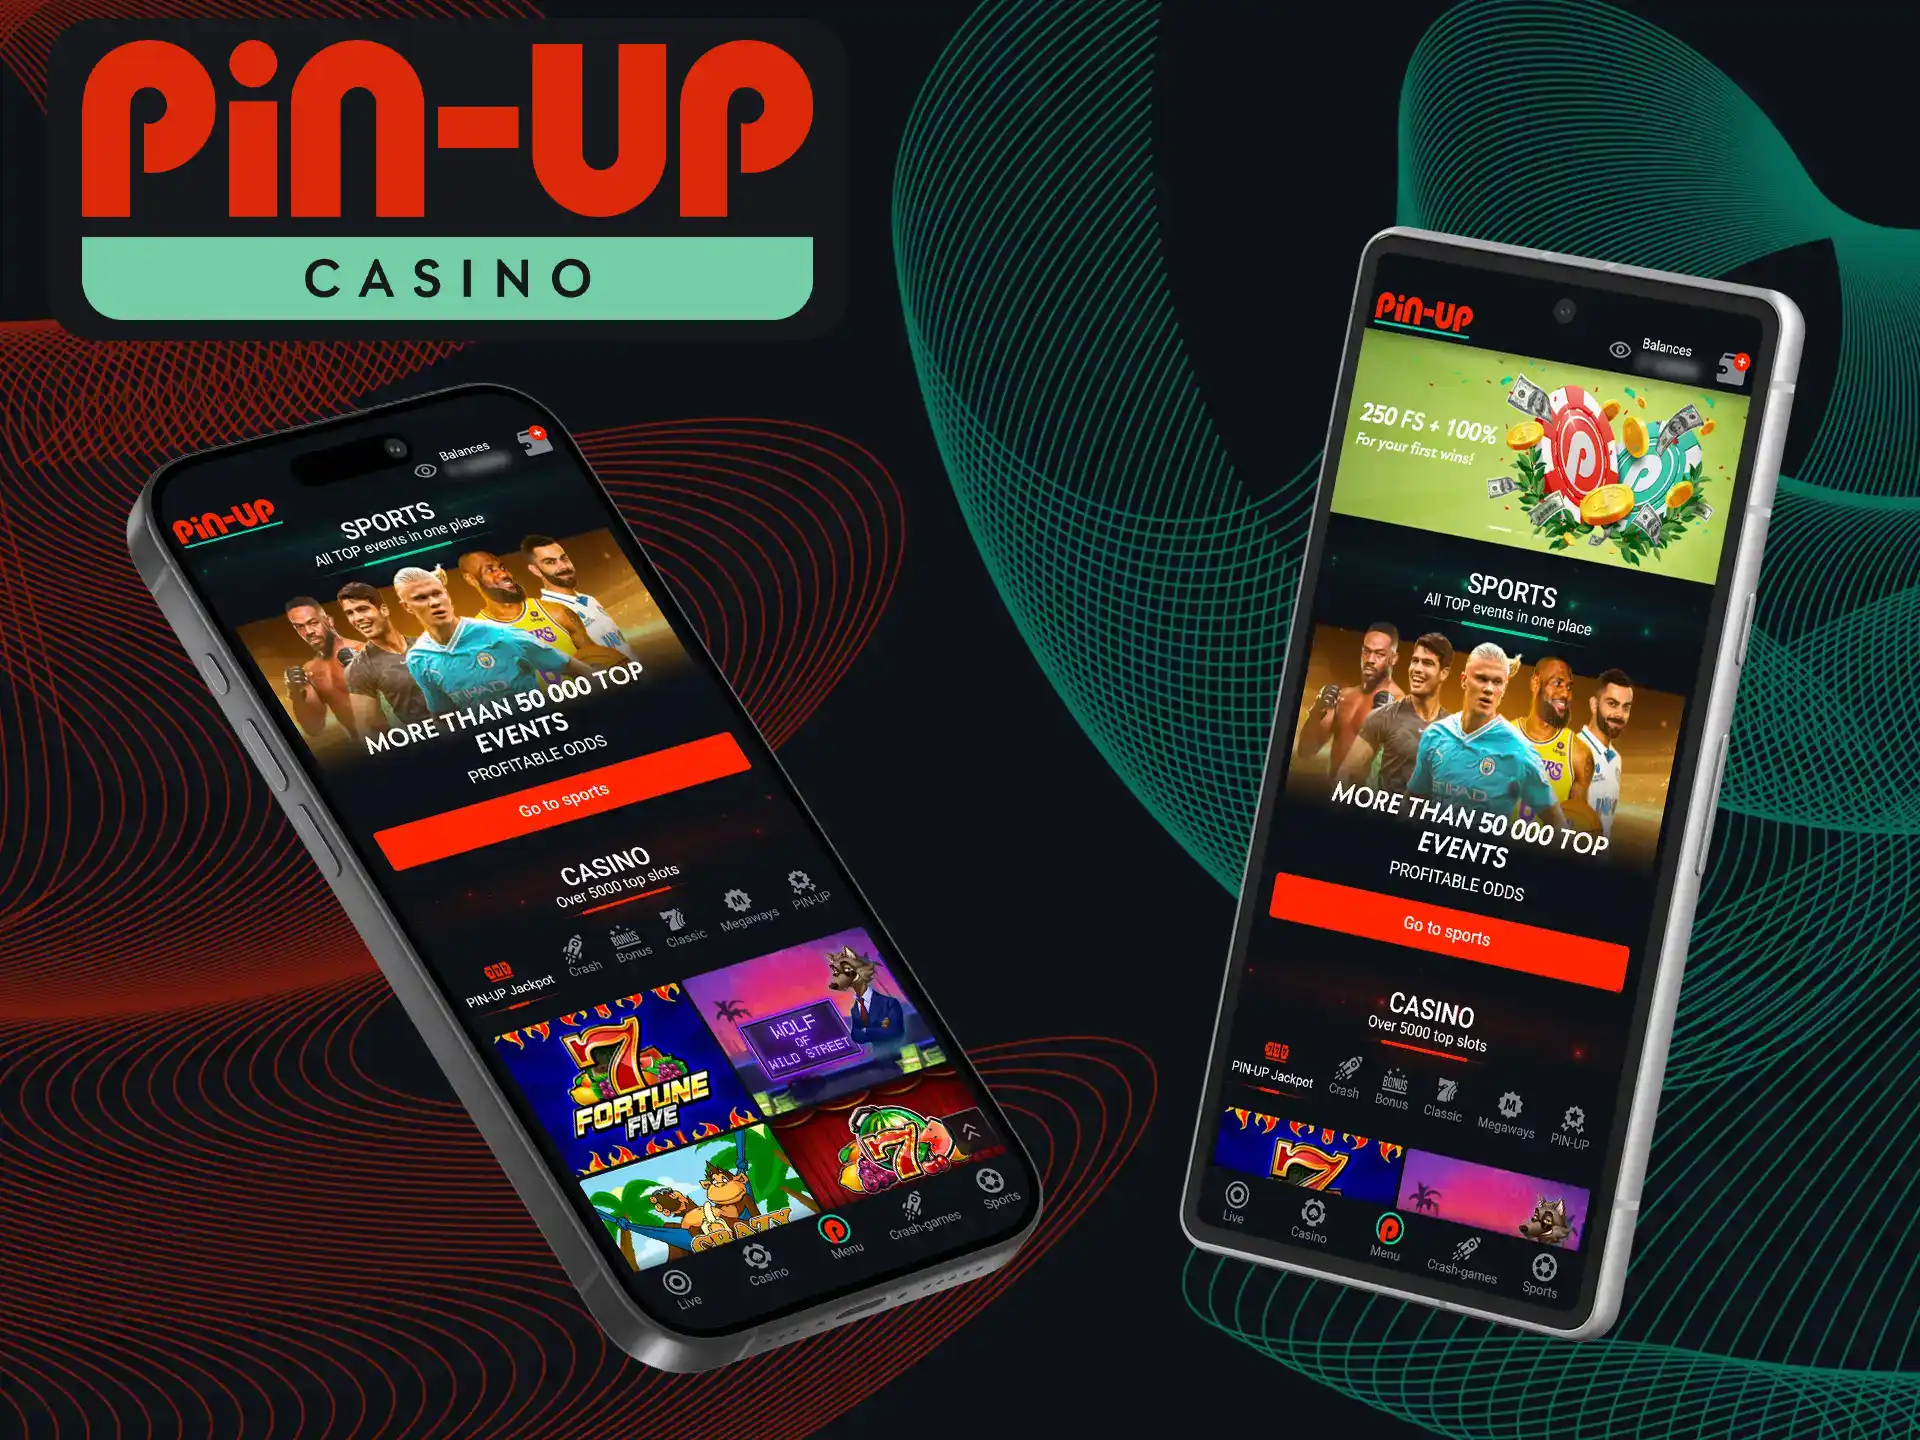 You can play directly on the Pin-Up Casino website if you don't want to download the app.